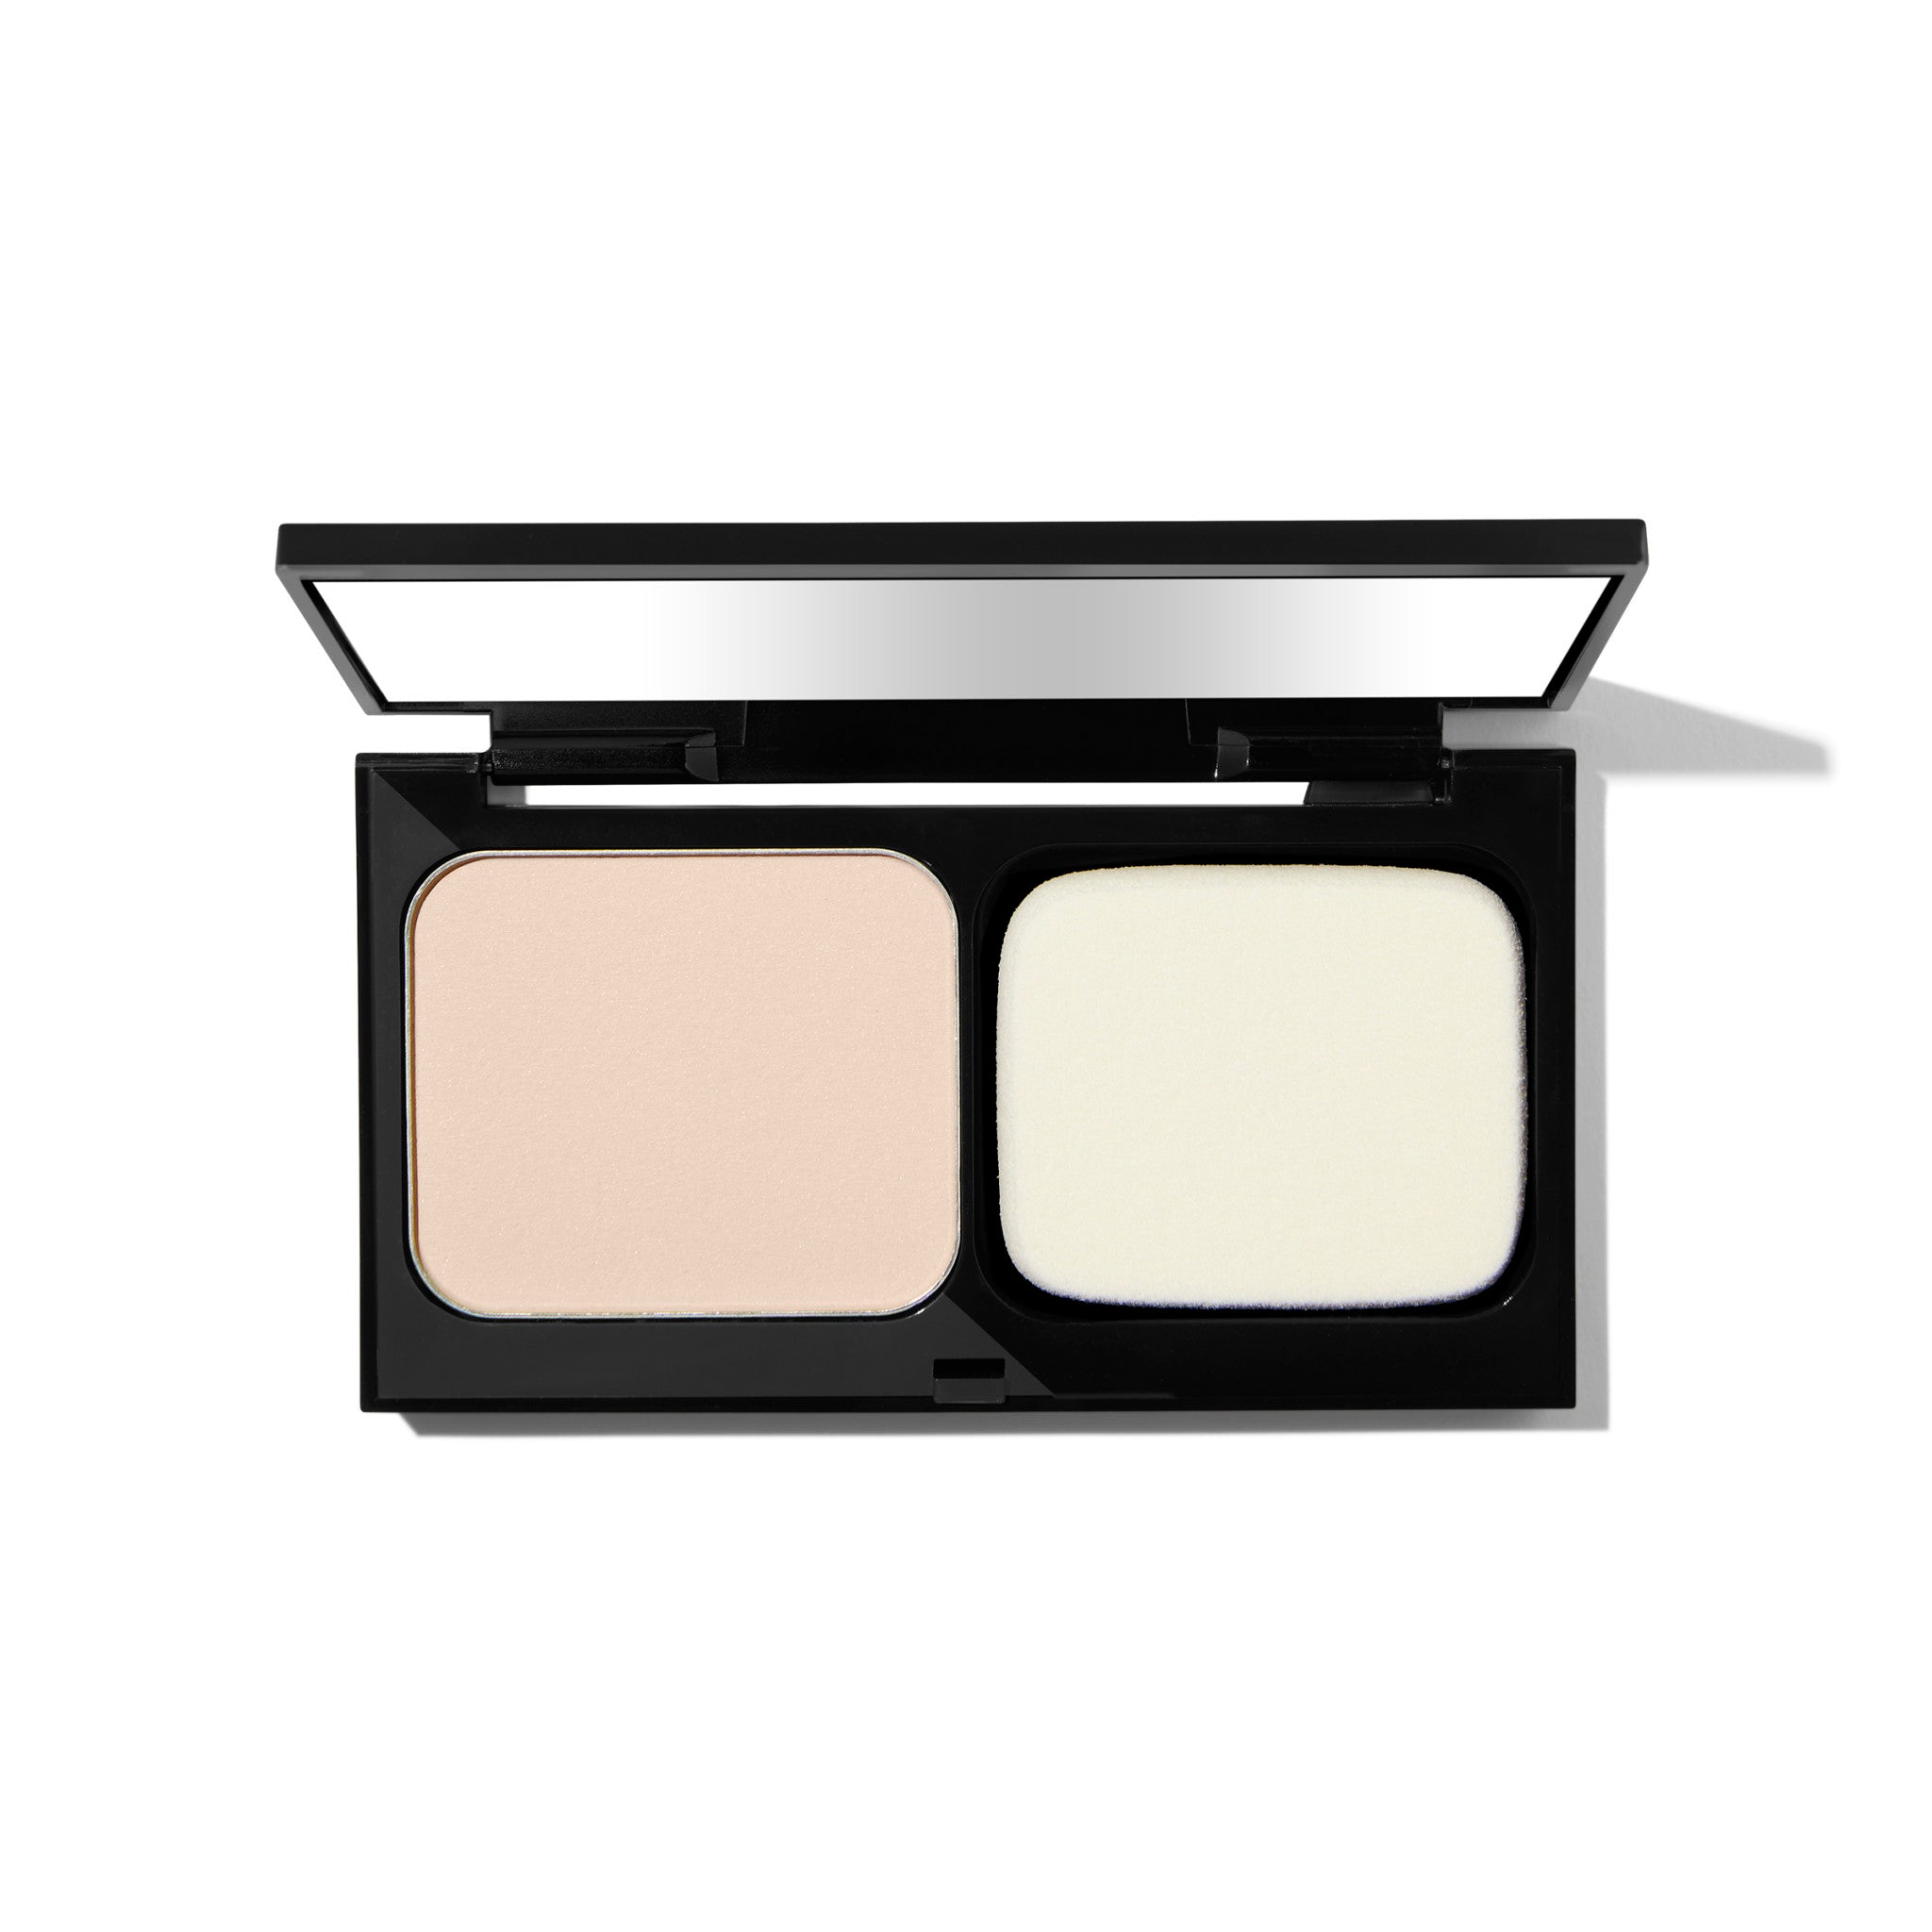 L'Oréal's Infallible Powder Foundation Has Your Back All Day